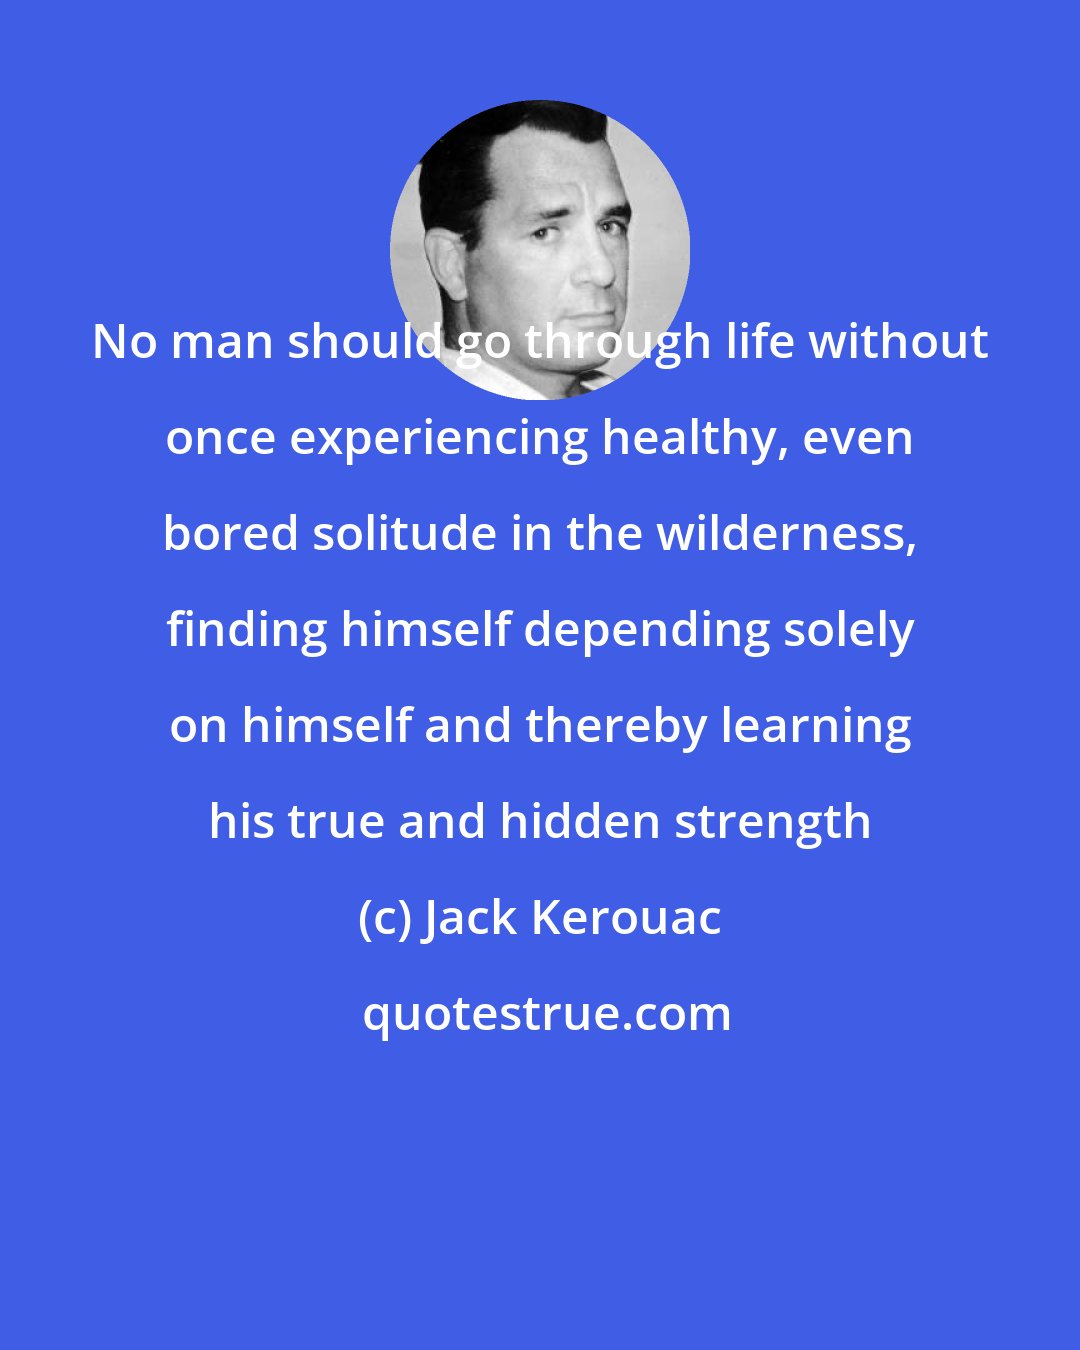 Jack Kerouac: No man should go through life without once experiencing healthy, even bored solitude in the wilderness, finding himself depending solely on himself and thereby learning his true and hidden strength